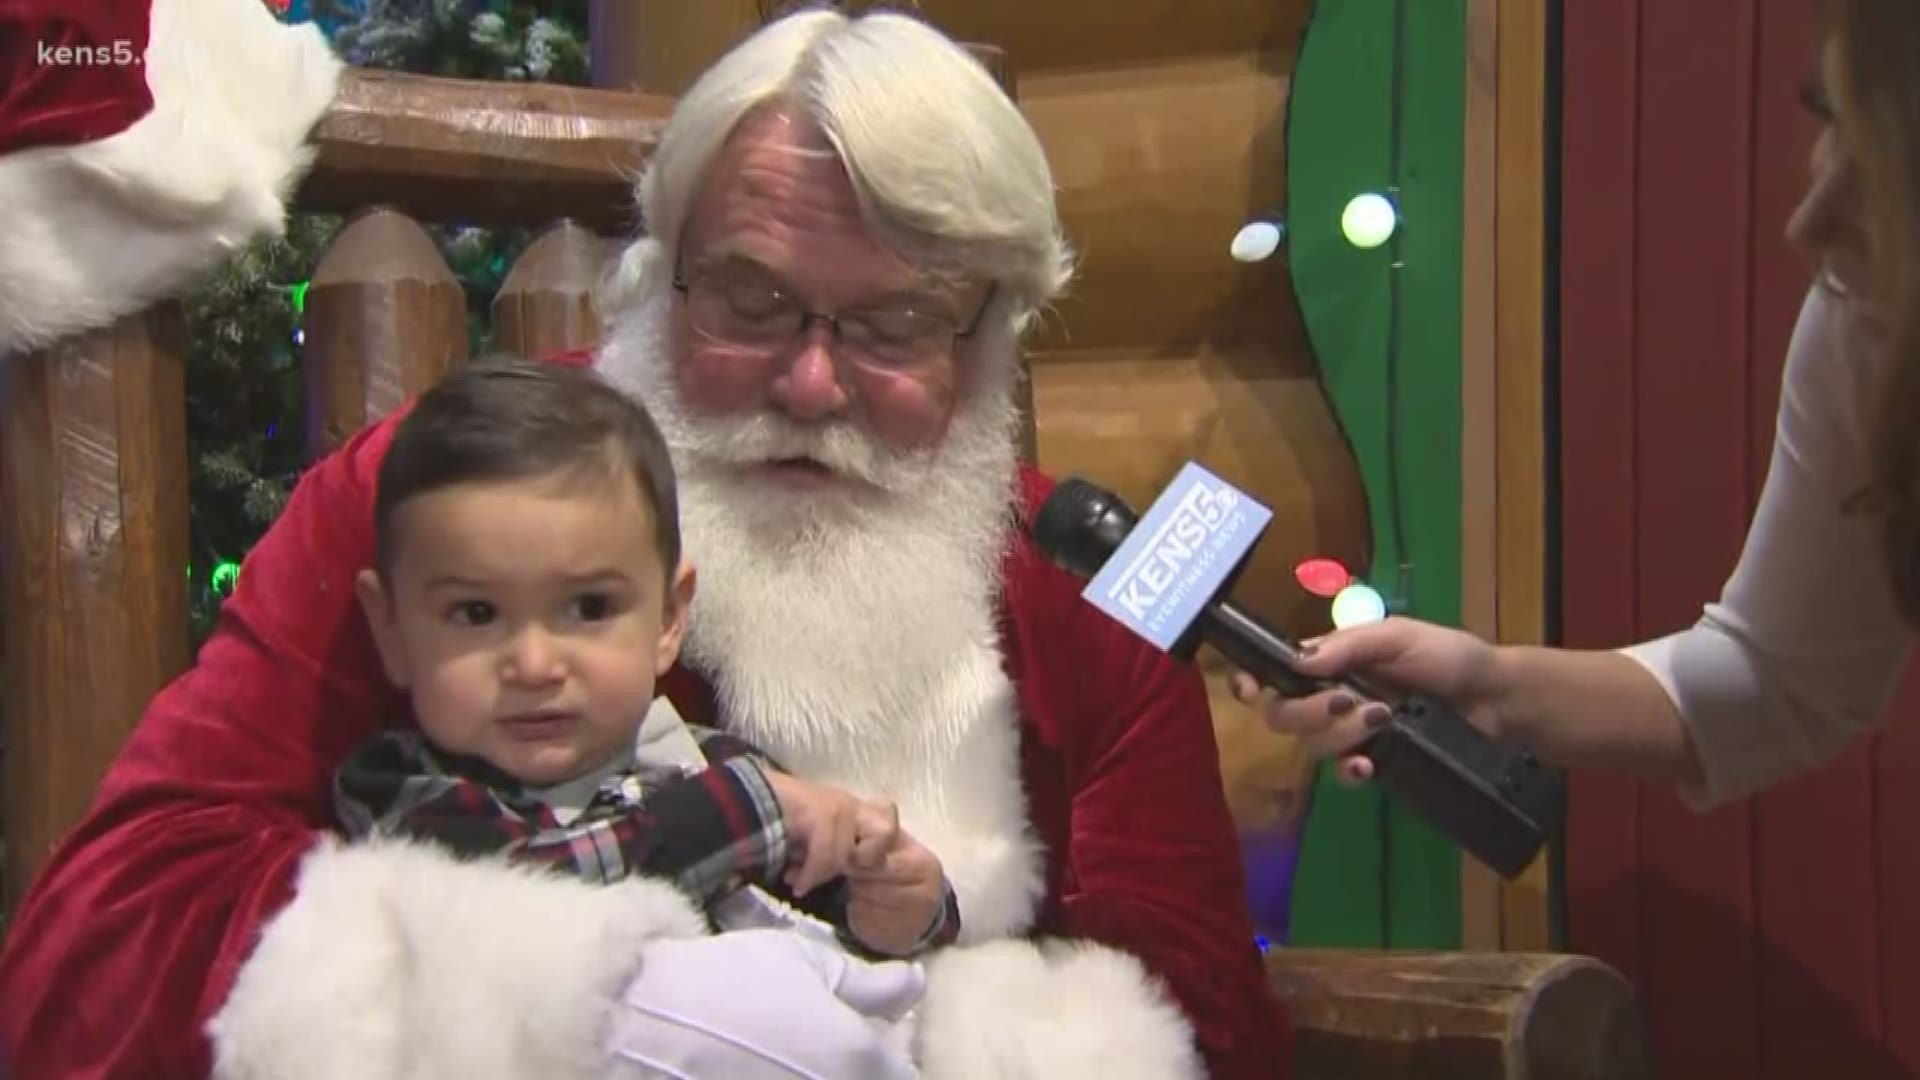 Little Javier gives his Christmas wish list to Santa at Bass Pro Shops.